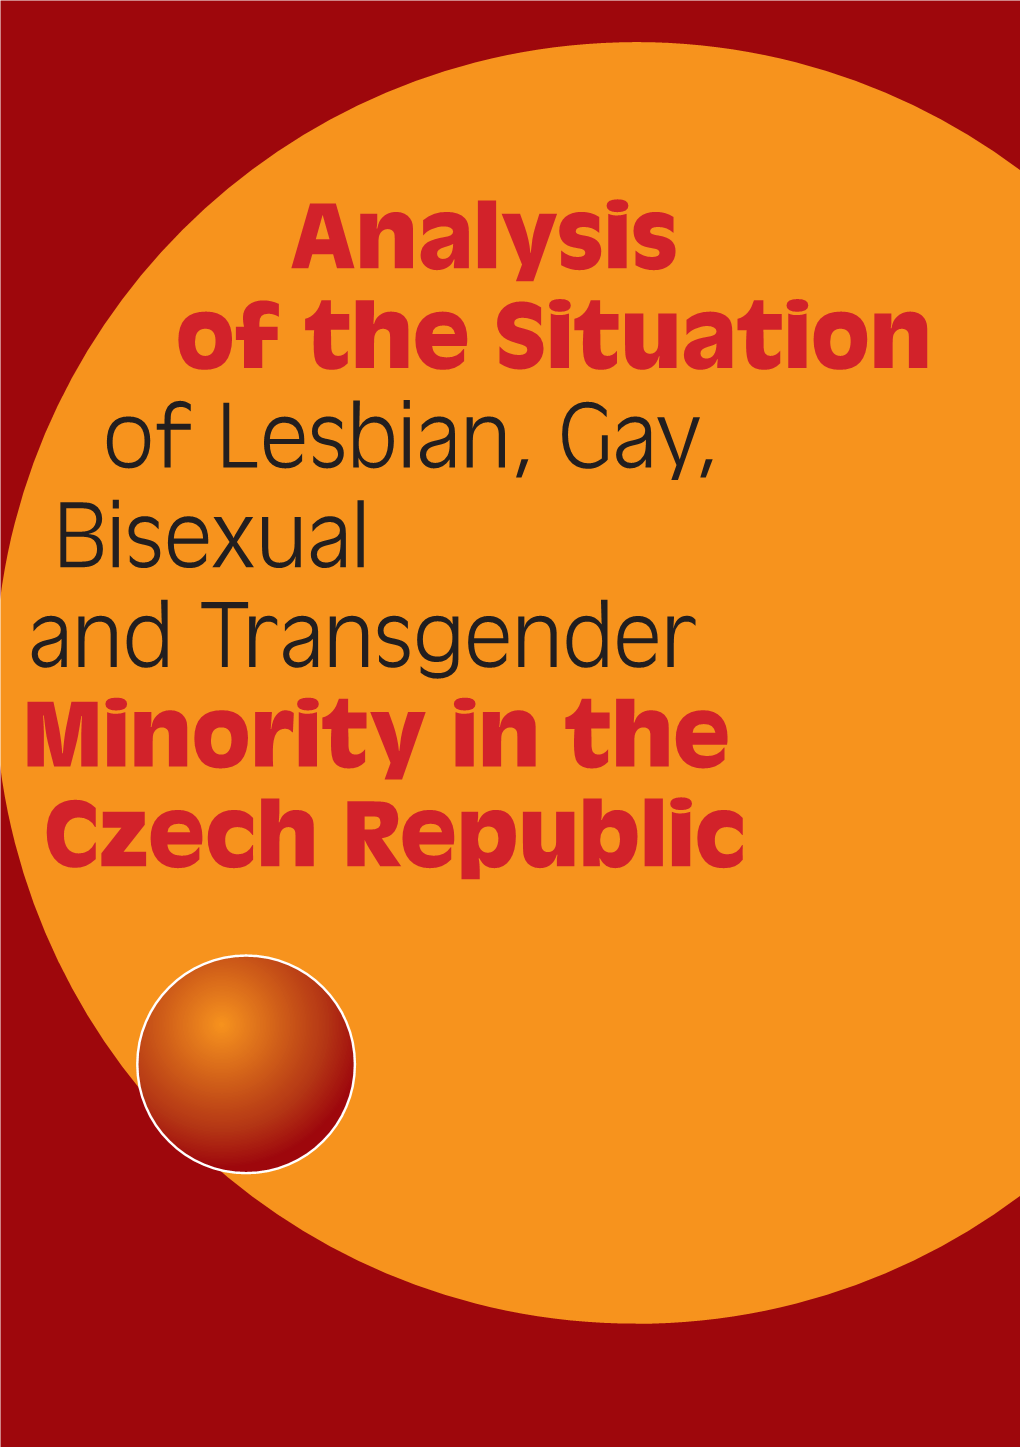 Analysis of the Situation of Lesbian, Gay, Bisexual and Transgender Minority in the Czech Republic